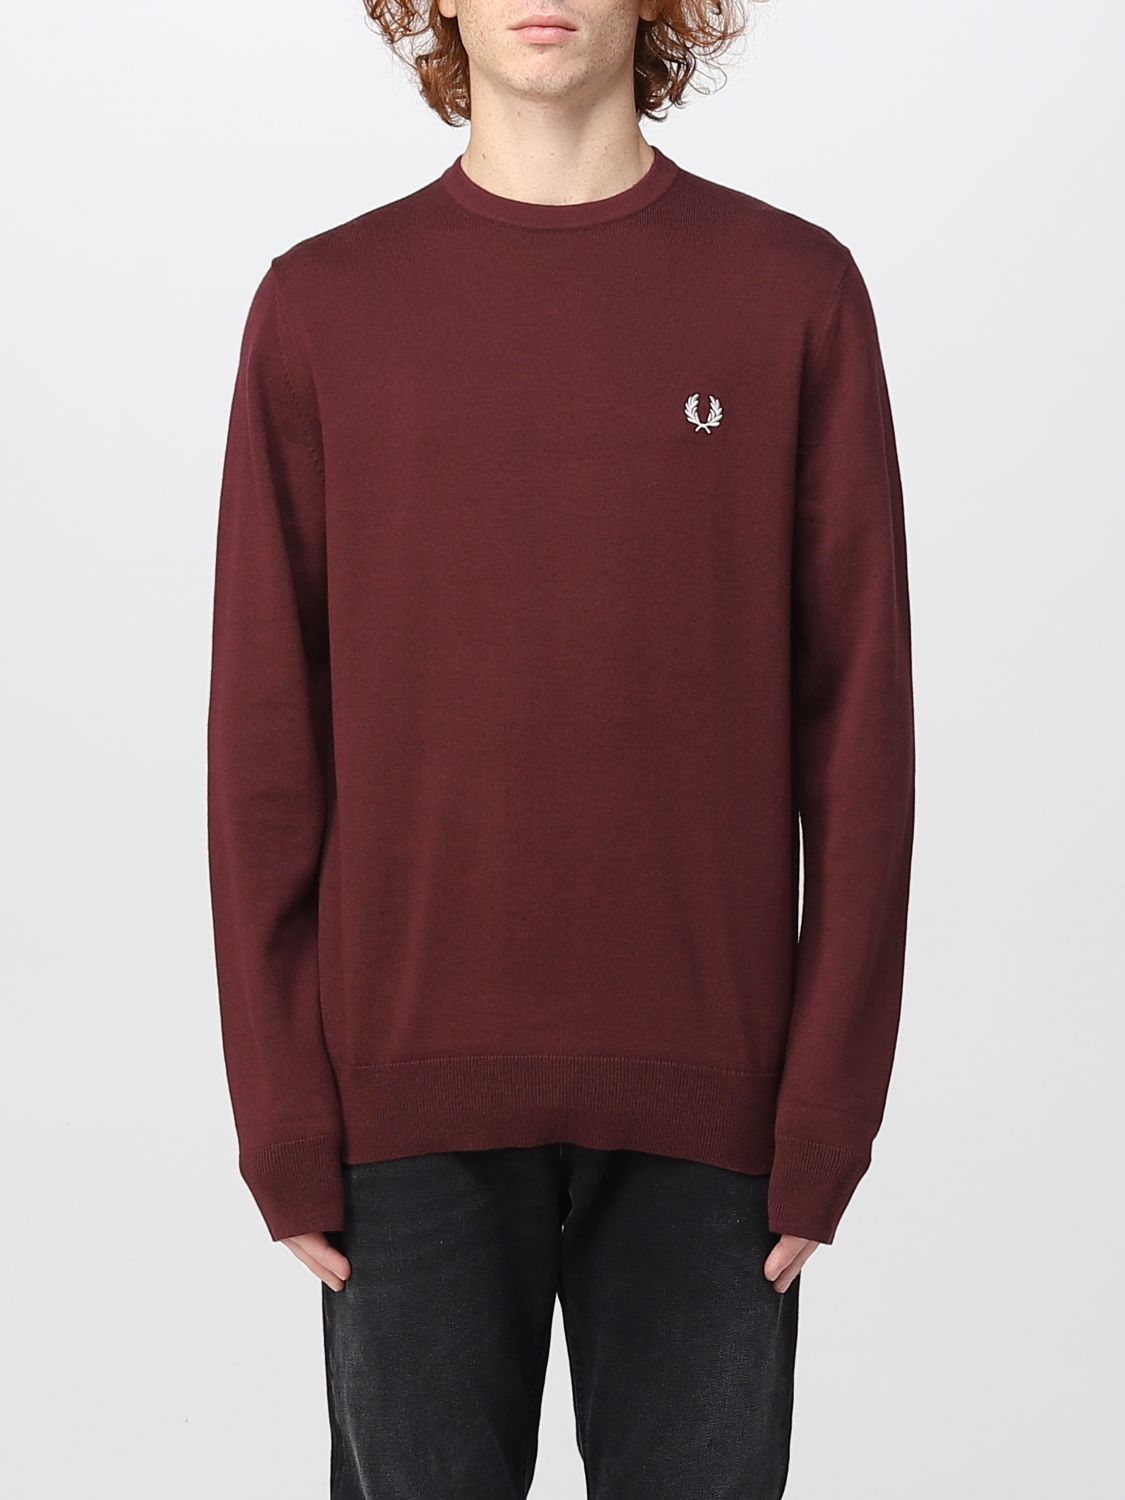 Pullover Fred Perry: Fred Perry Herren Pullover burgunderrot 1